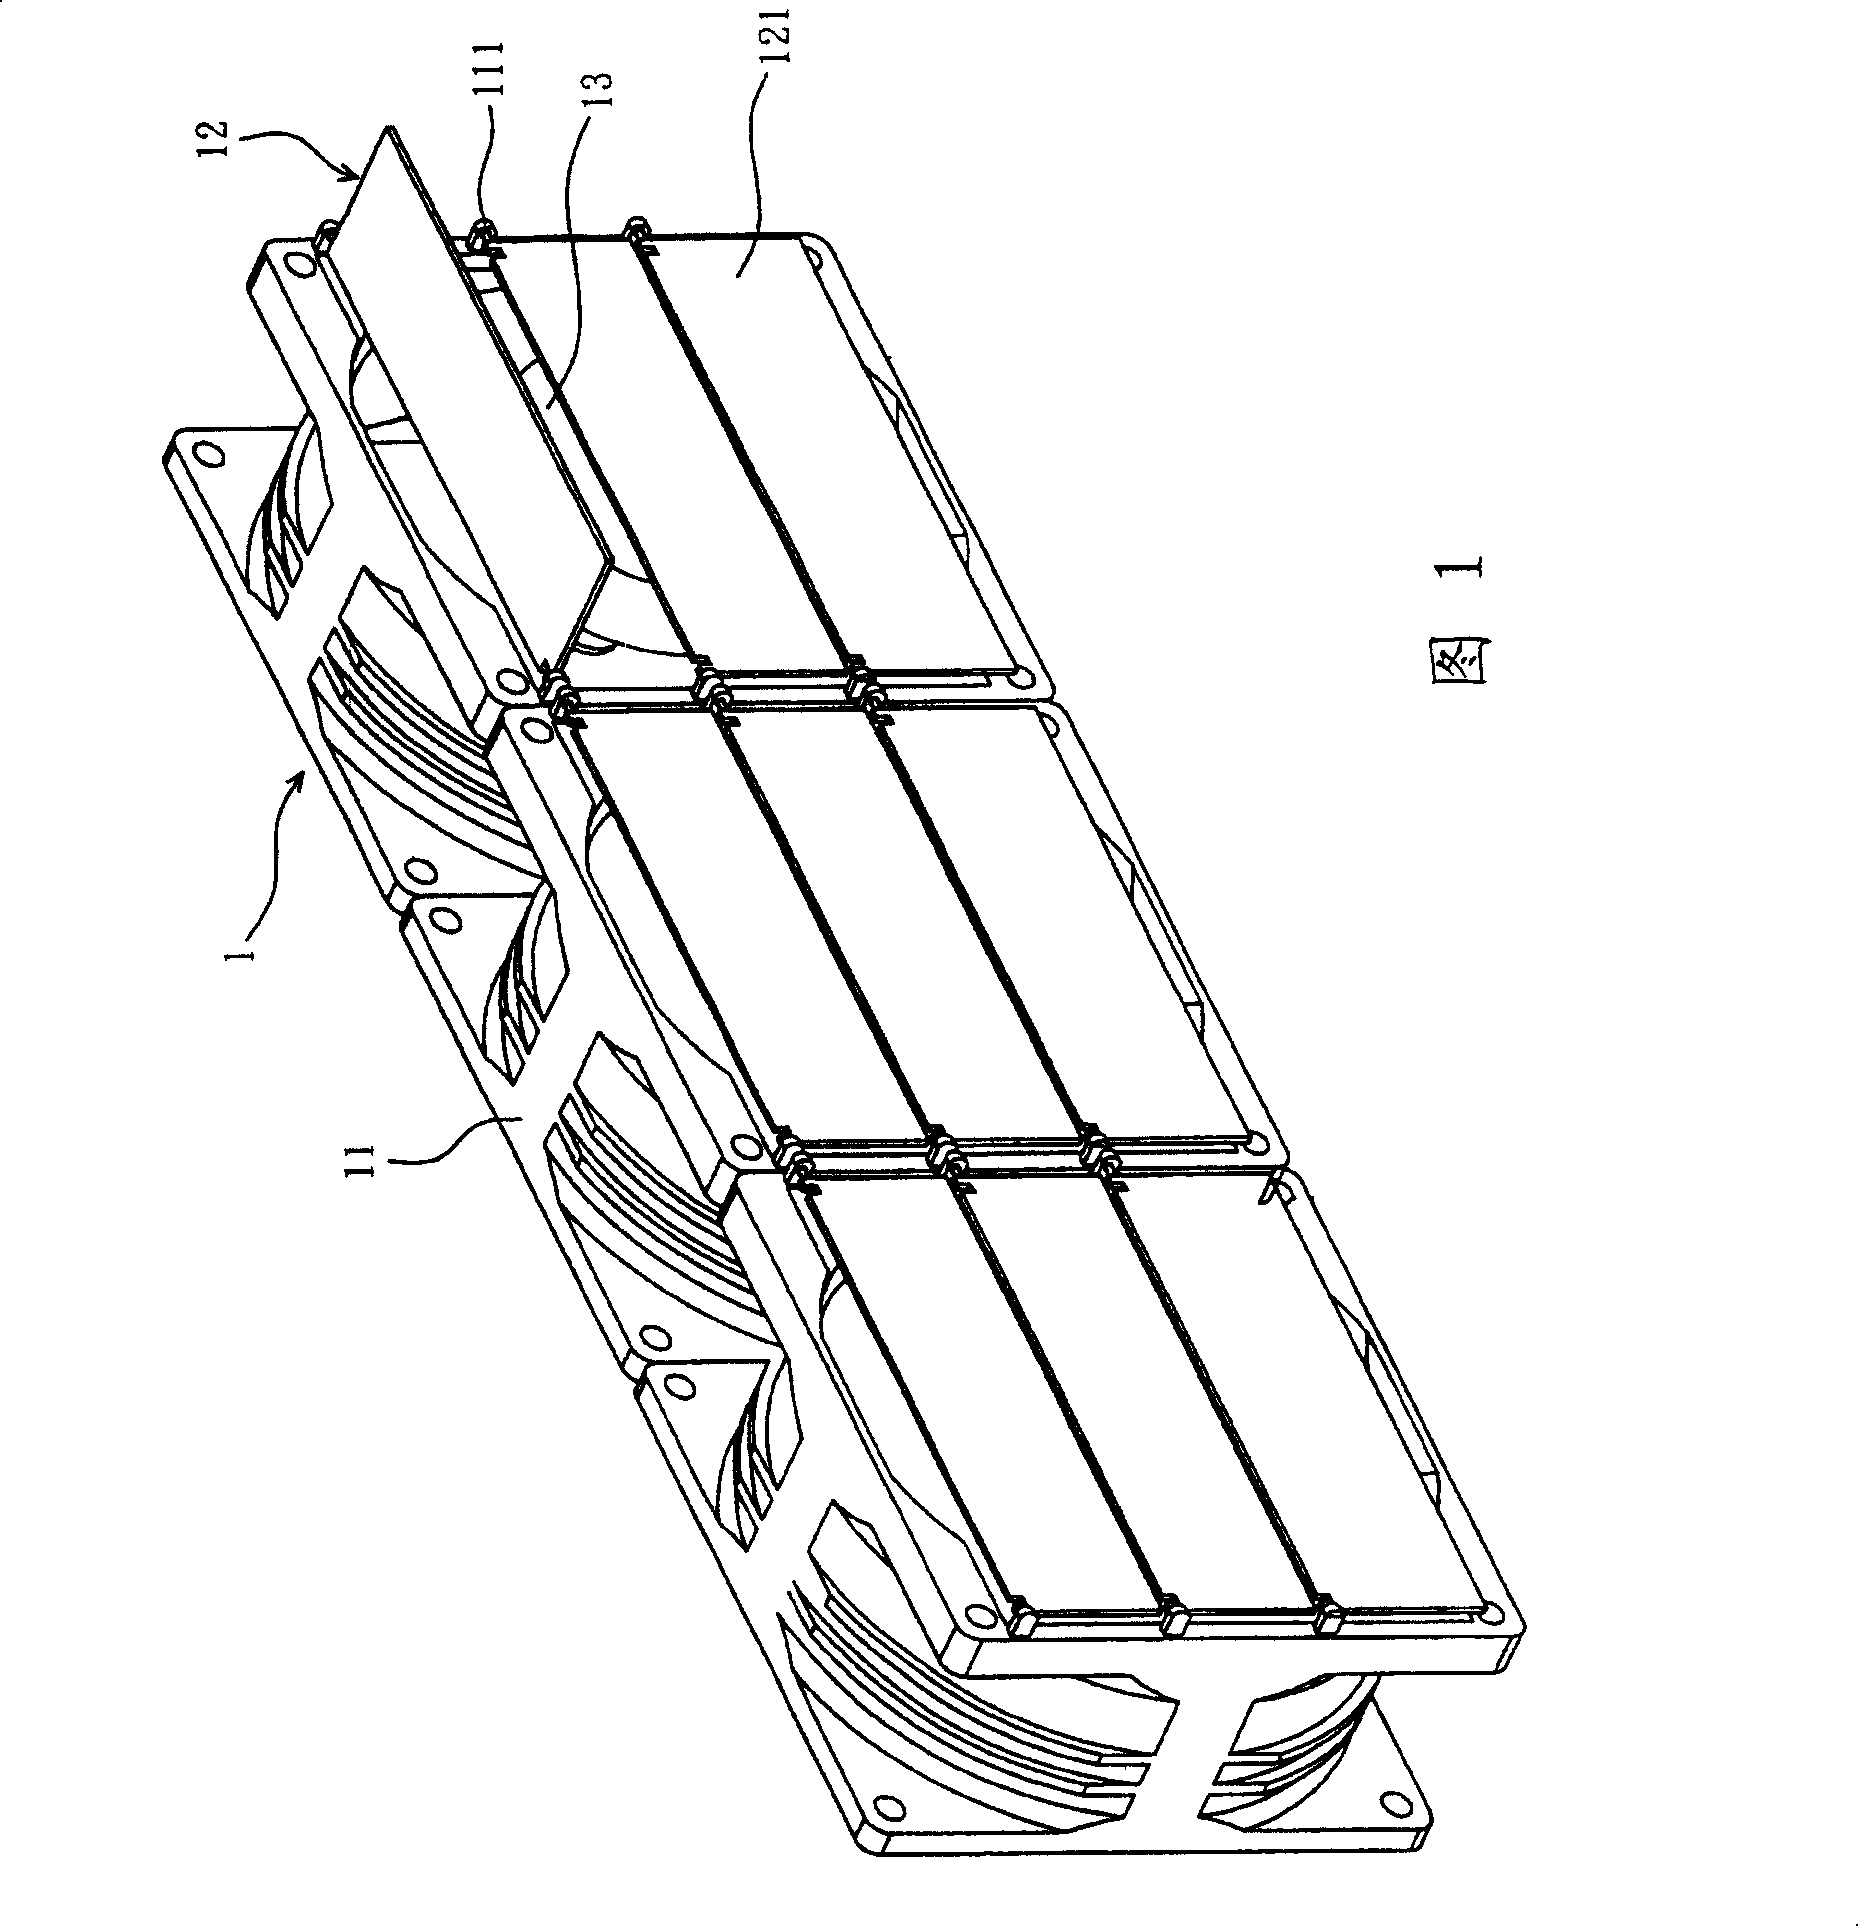 Fan with fan window structure and fan frame thereof